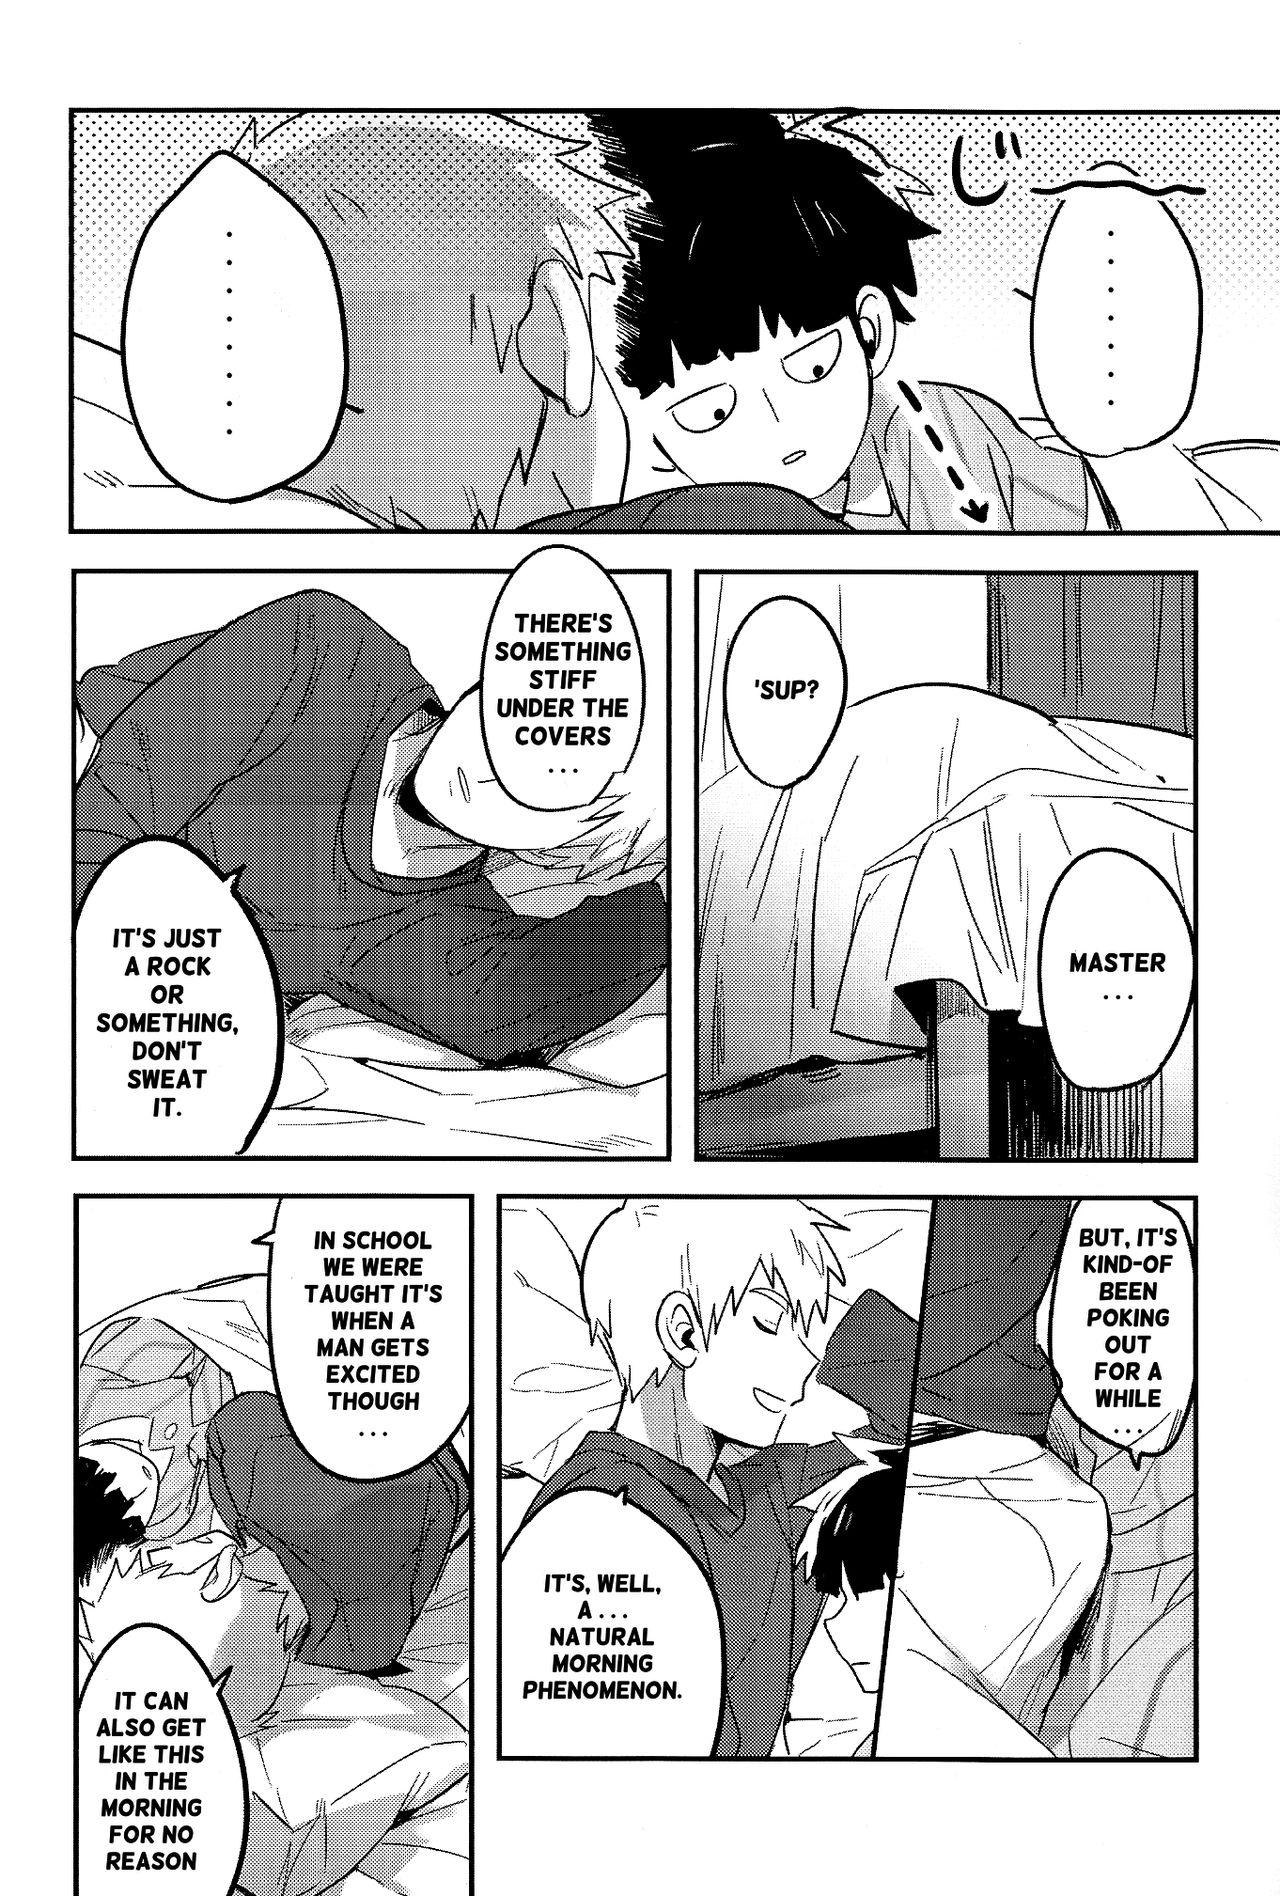 Strange Moment Ring - Mob psycho 100 Fucked - Page 12